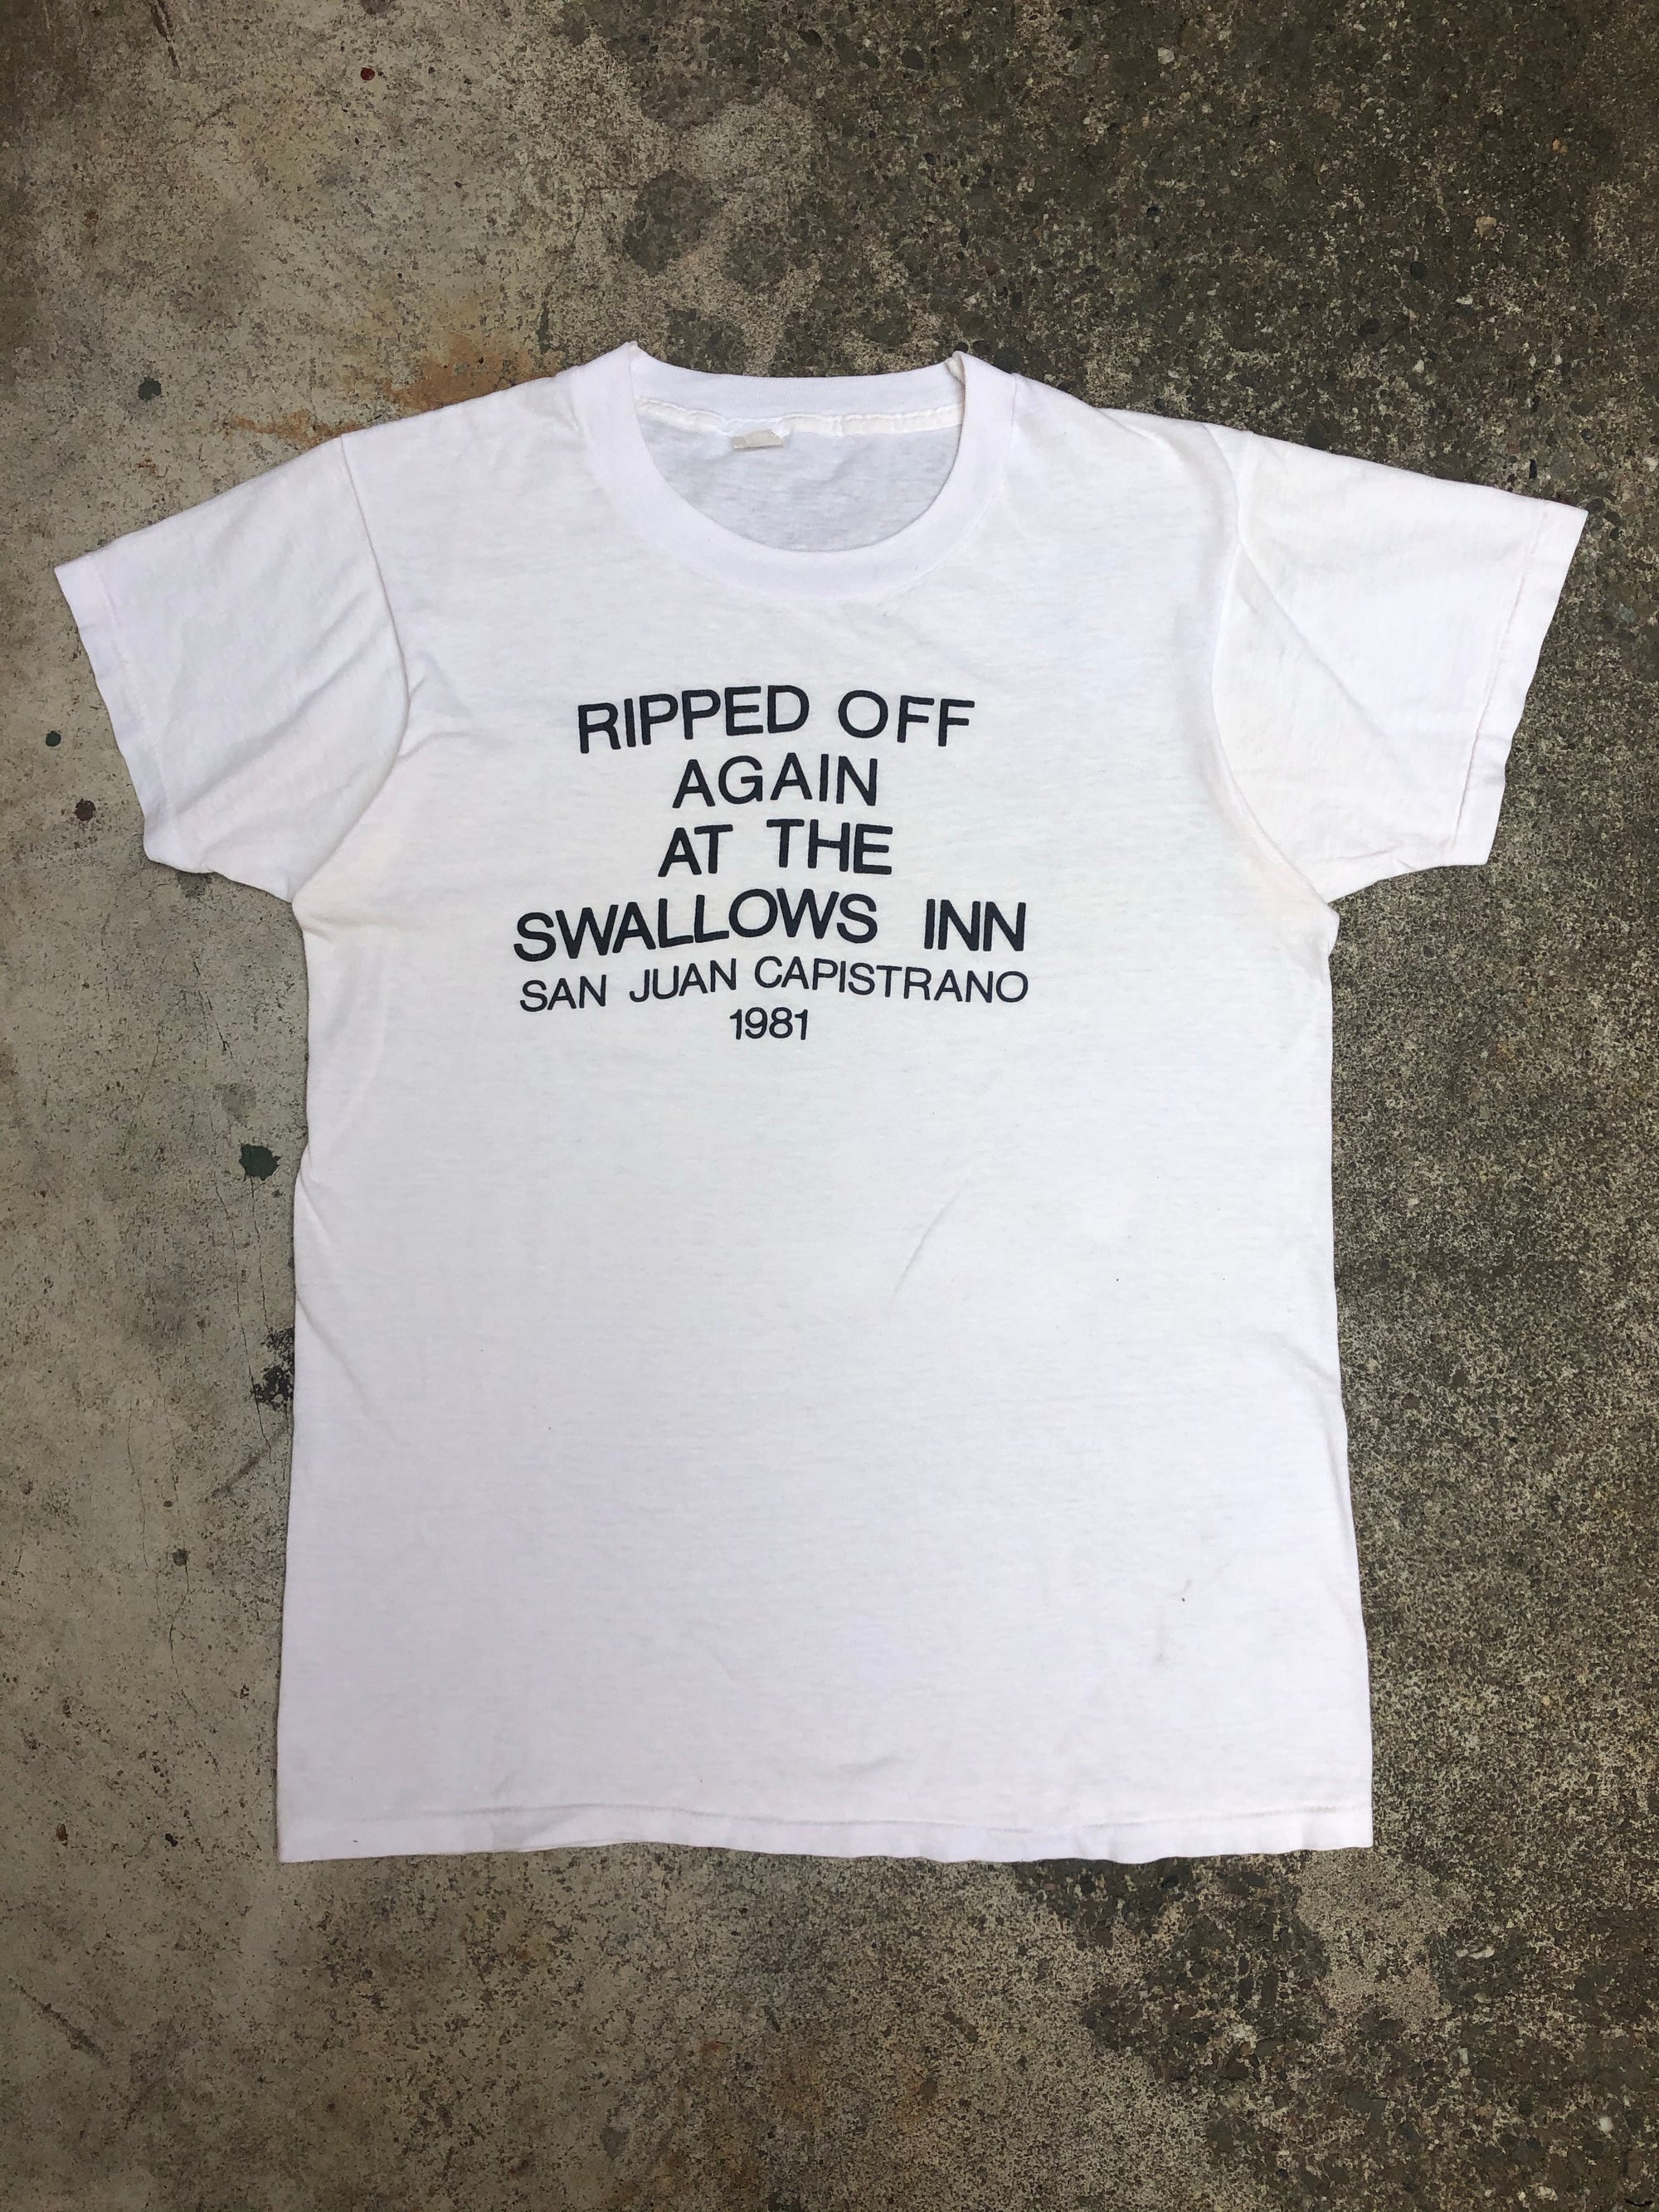 1980s Single Stitched “Ripped Off Again” Tee